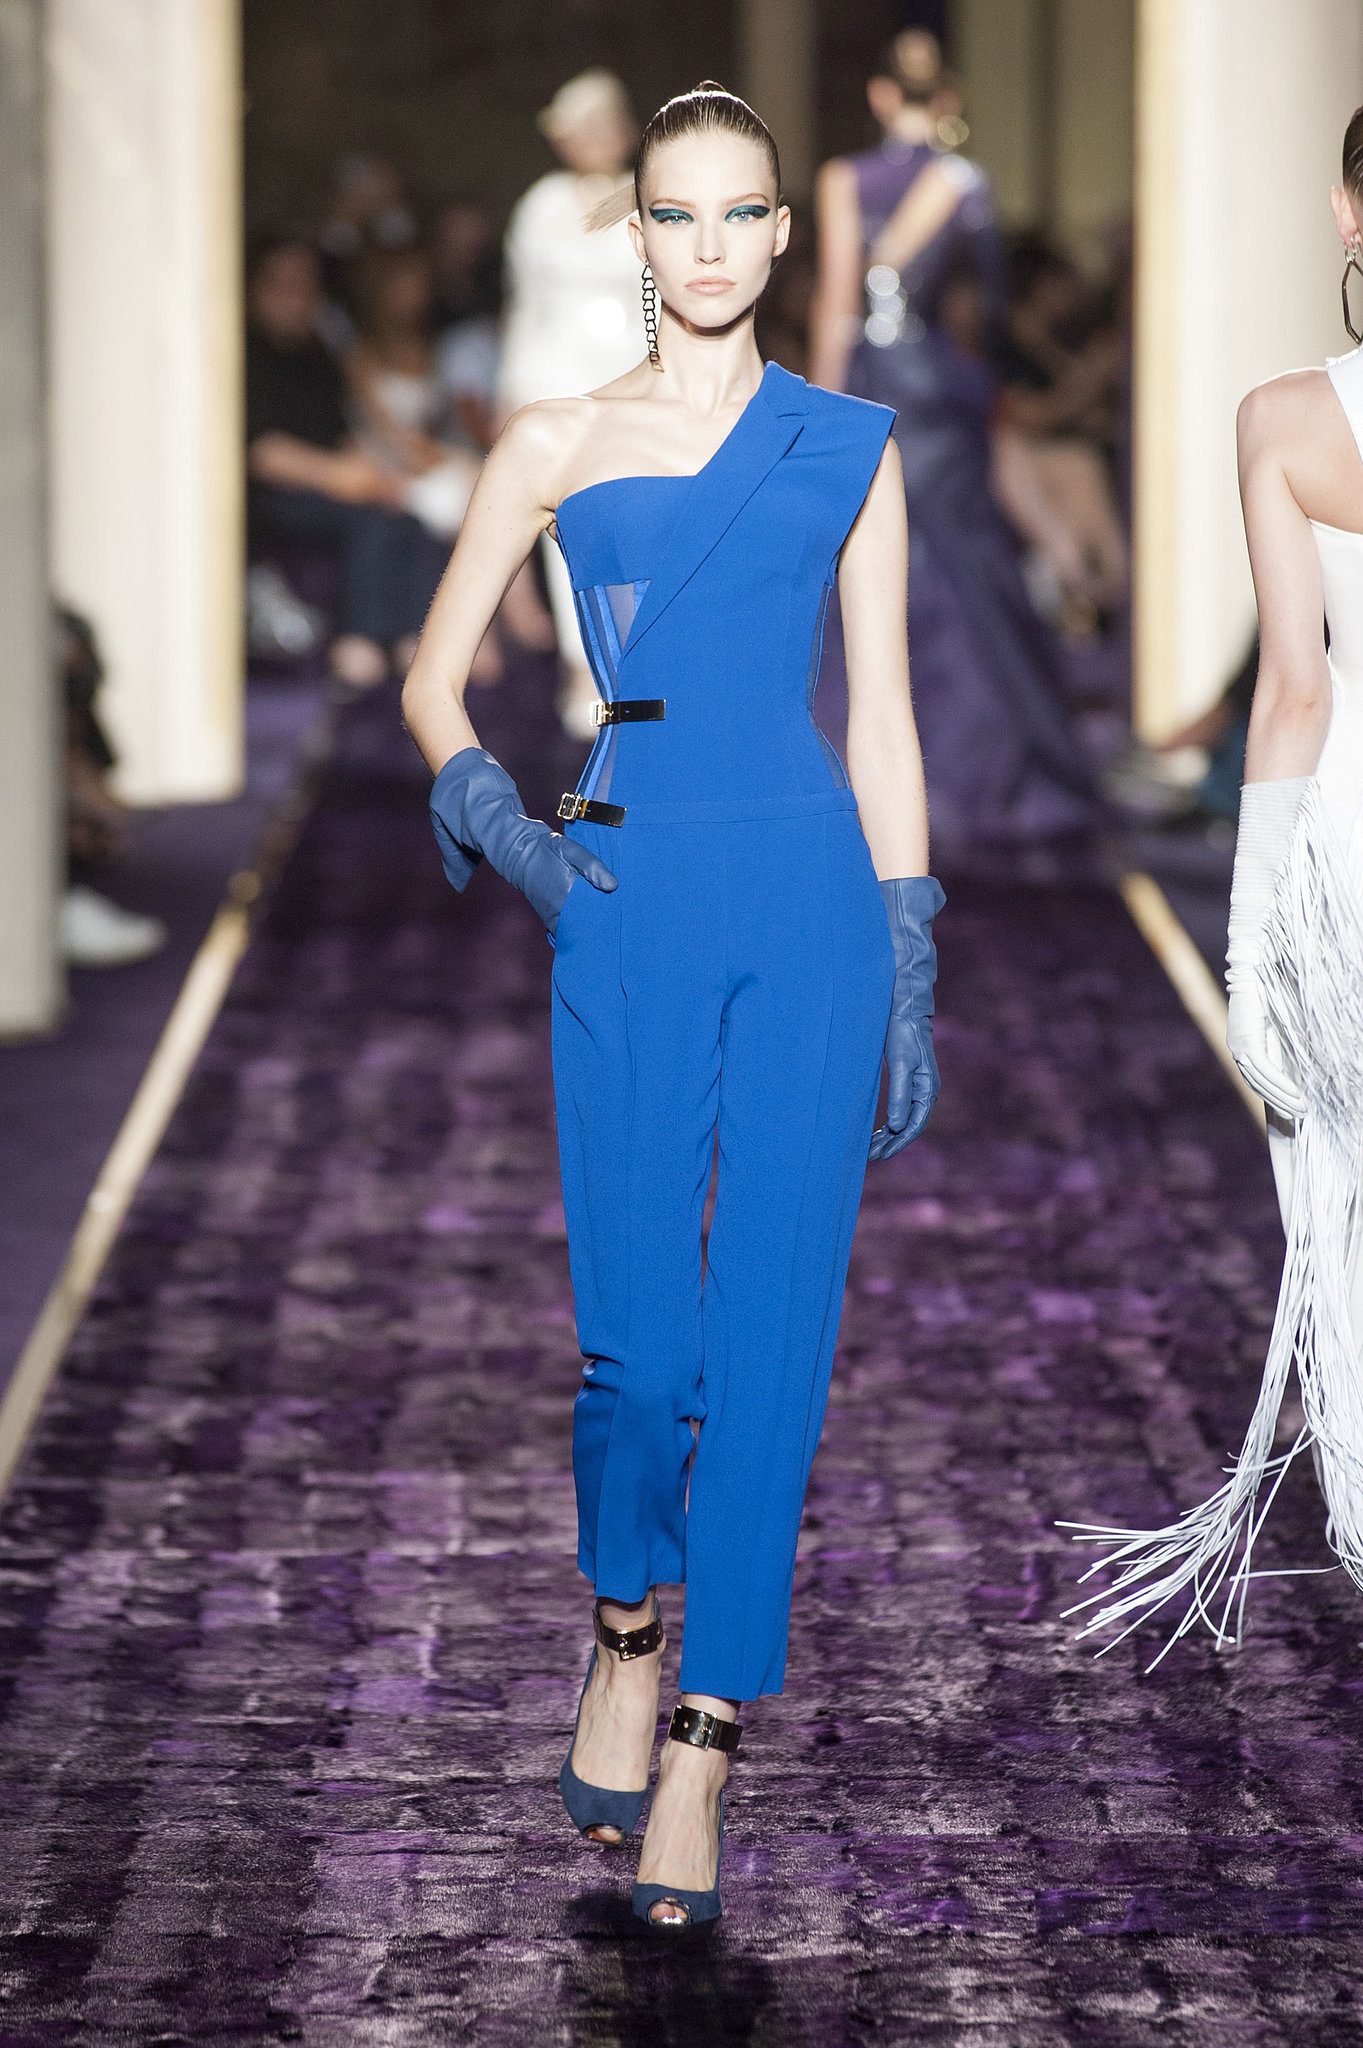 TOUT EN VOGUE!: The Couture Week Looks We Hope to See on the Red Carpet